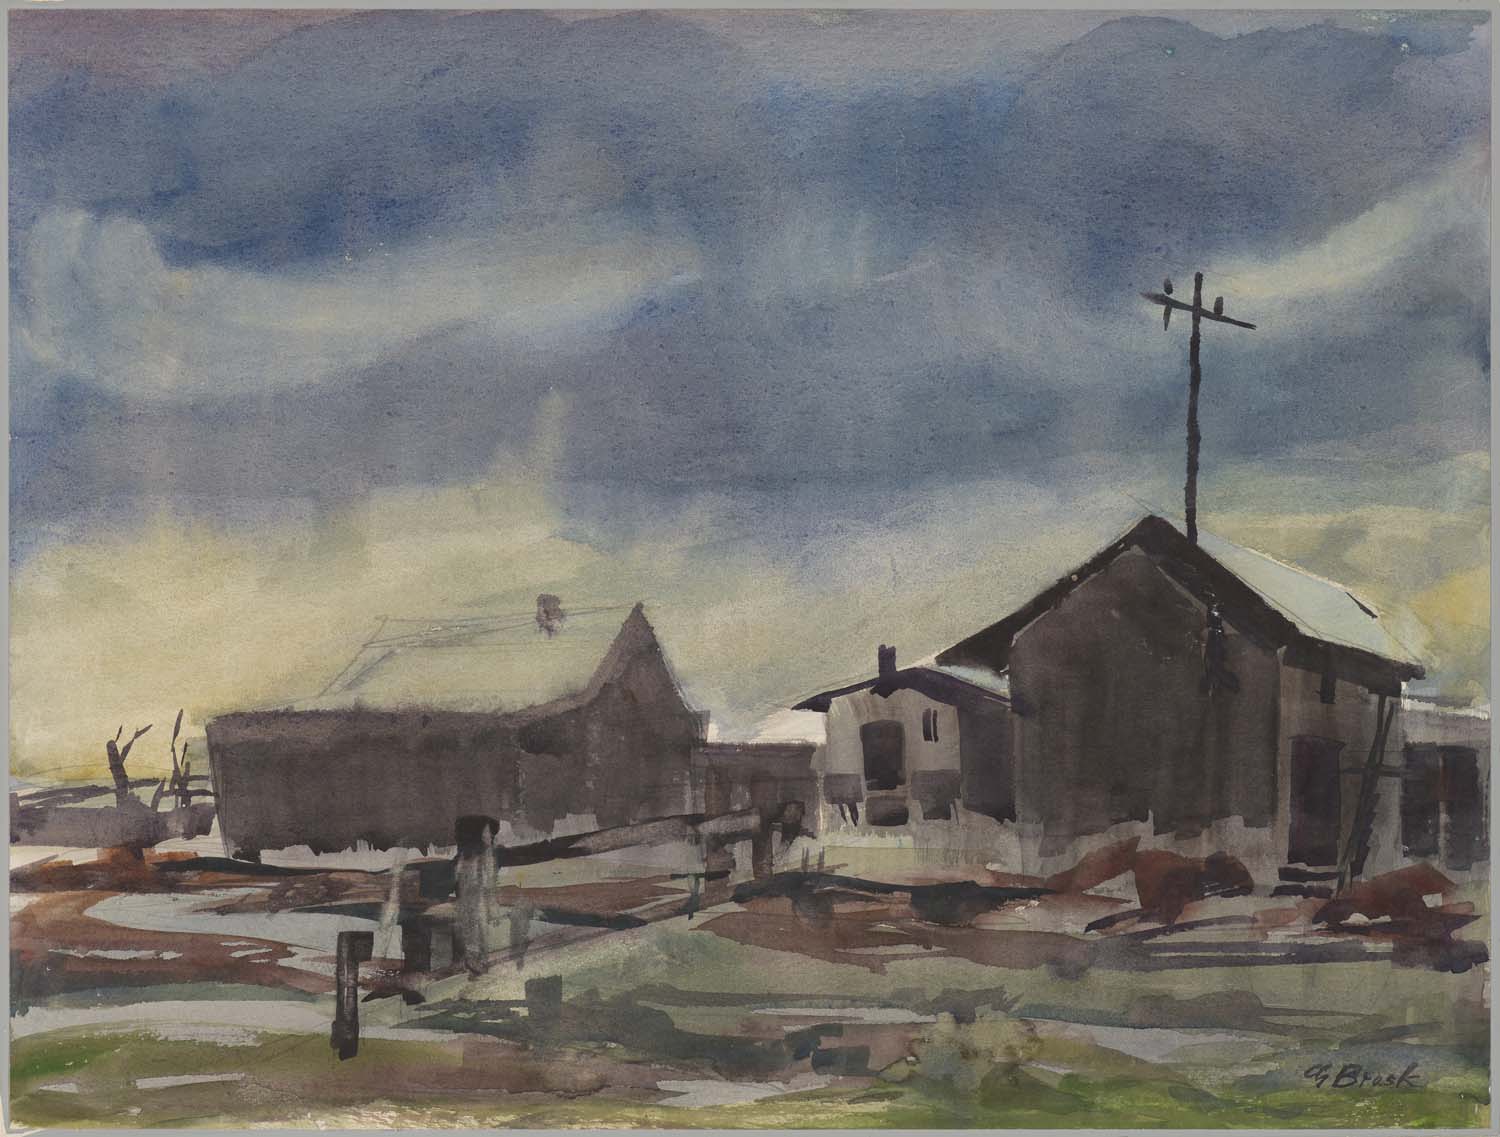 Watercolor painting of a few wooden buildings with a cloudy sky above